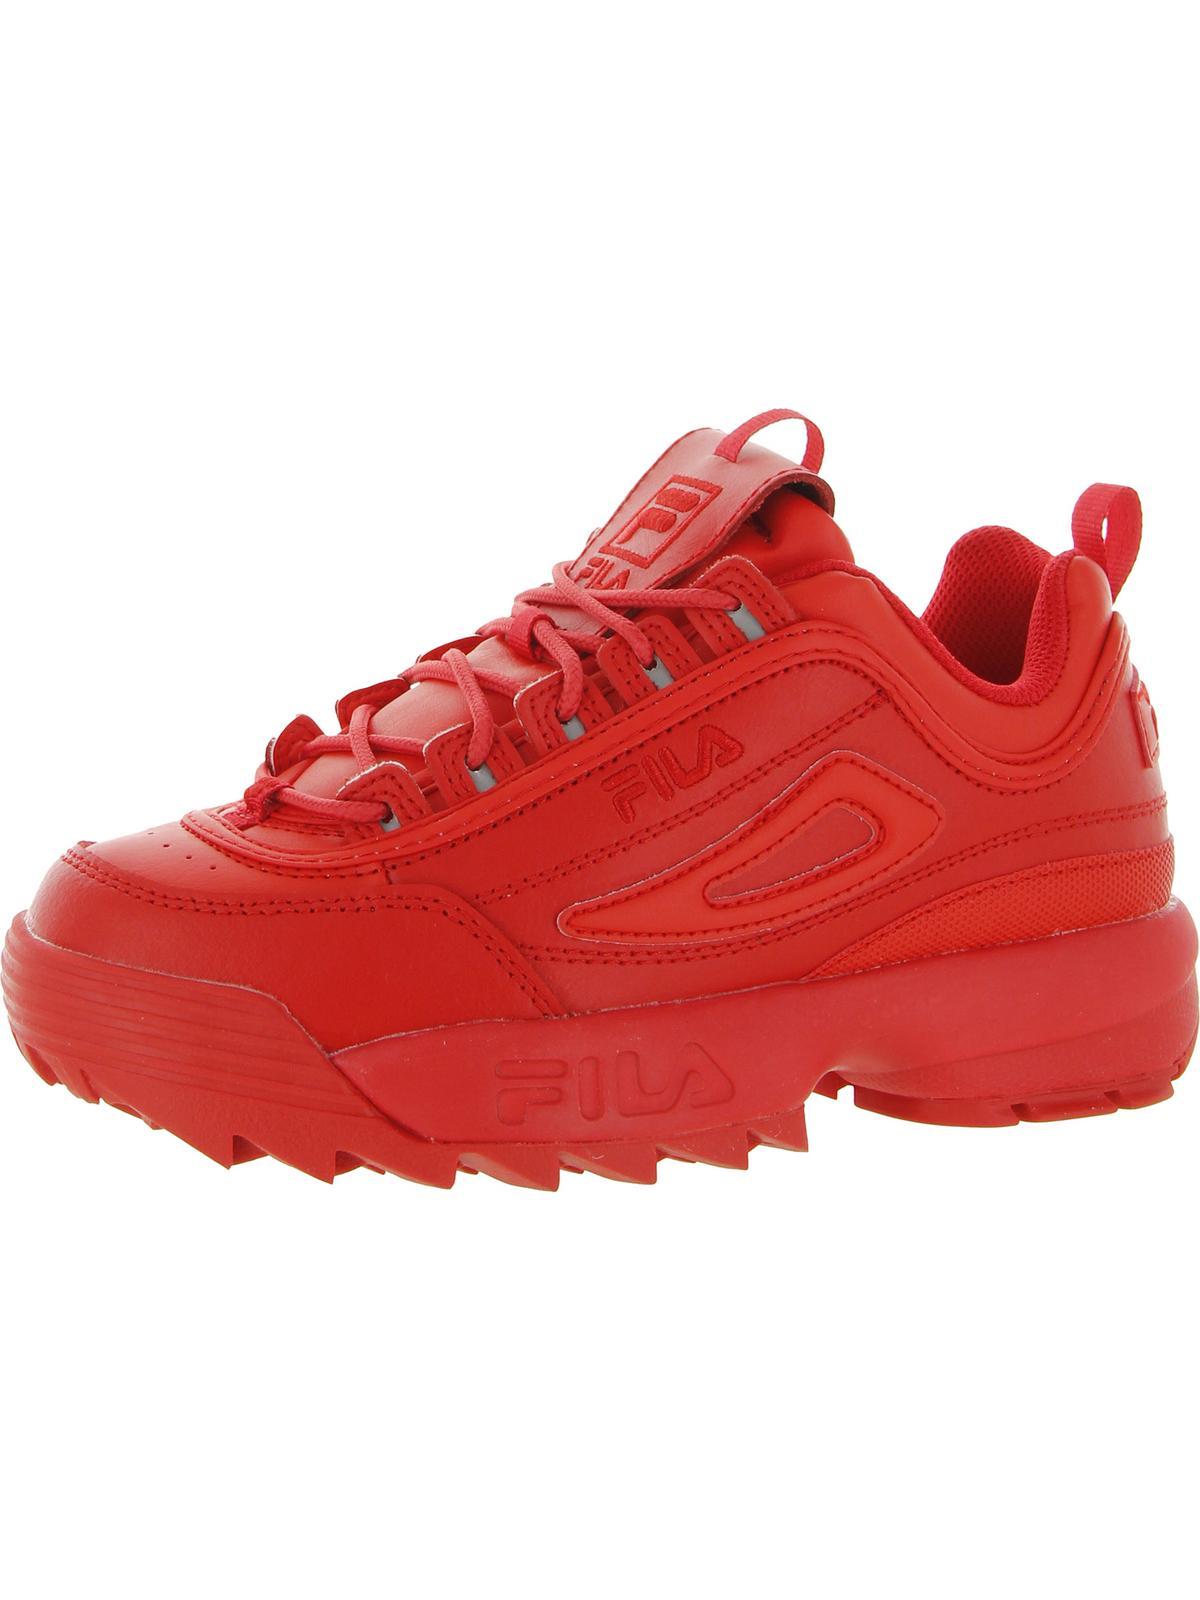 Disruptor Ll Premium Leather Lifestyle Athletic And Training in Red | Lyst